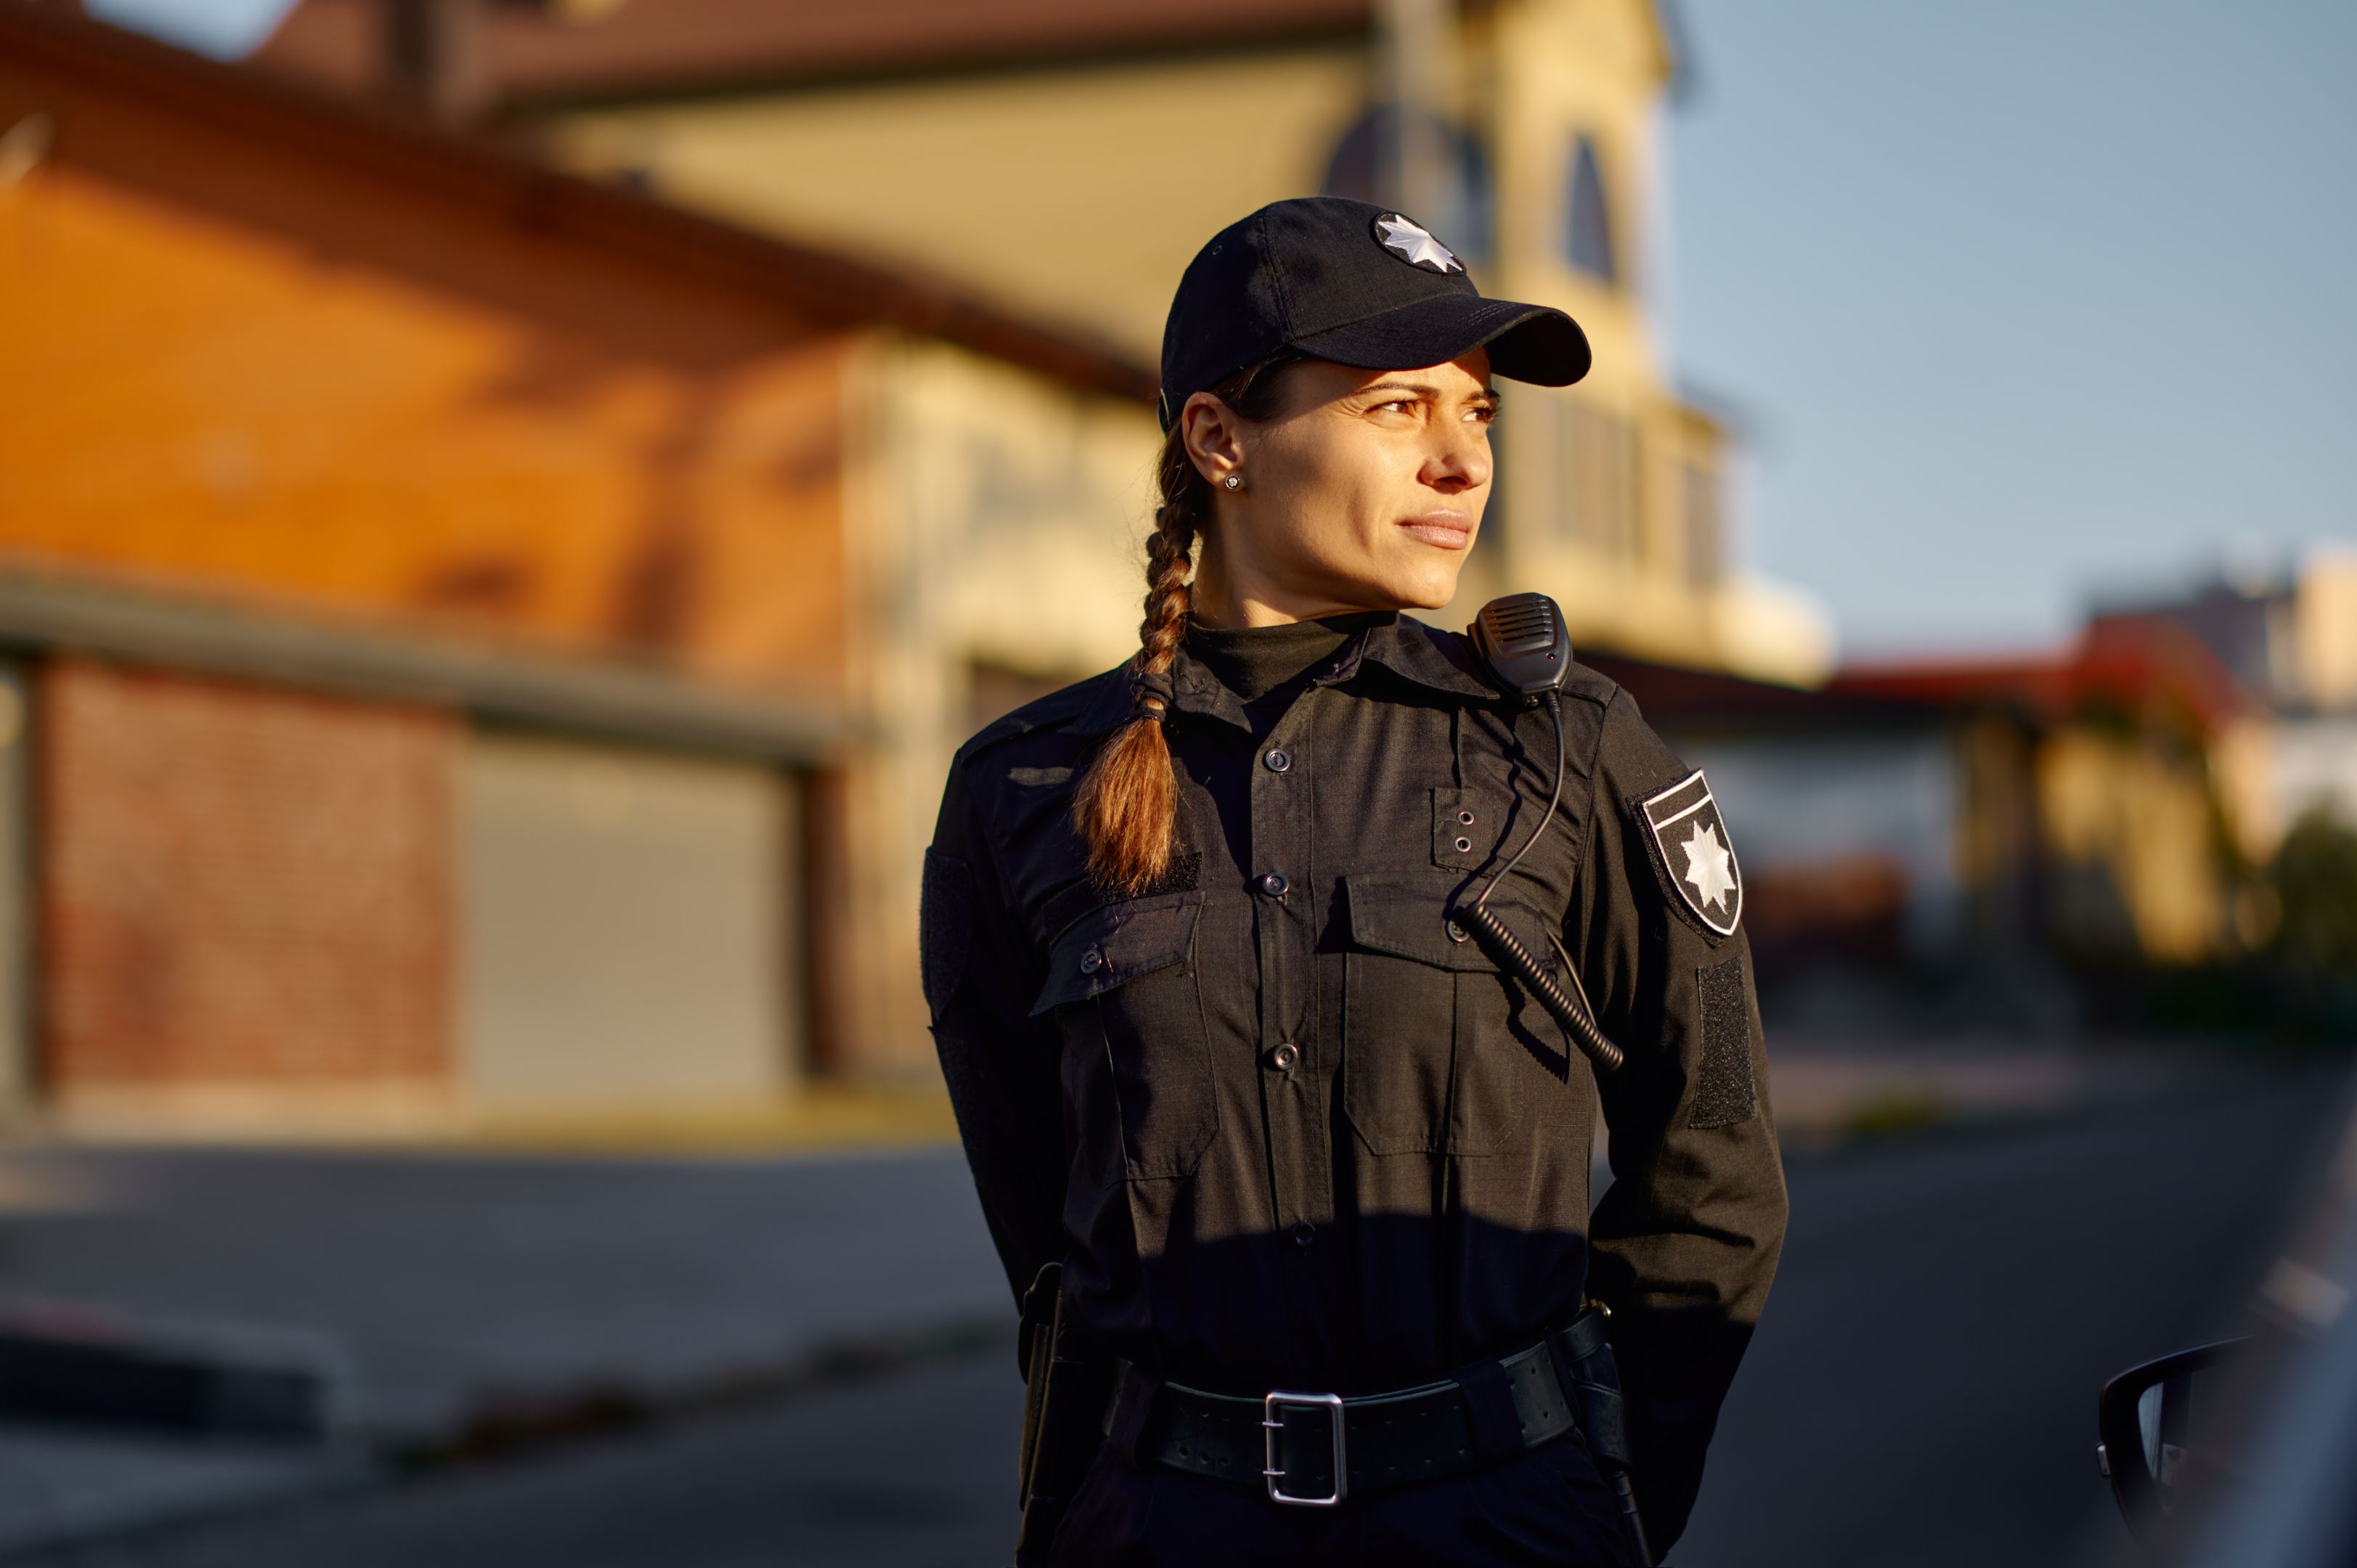 women with security wear - showing 1 - trust